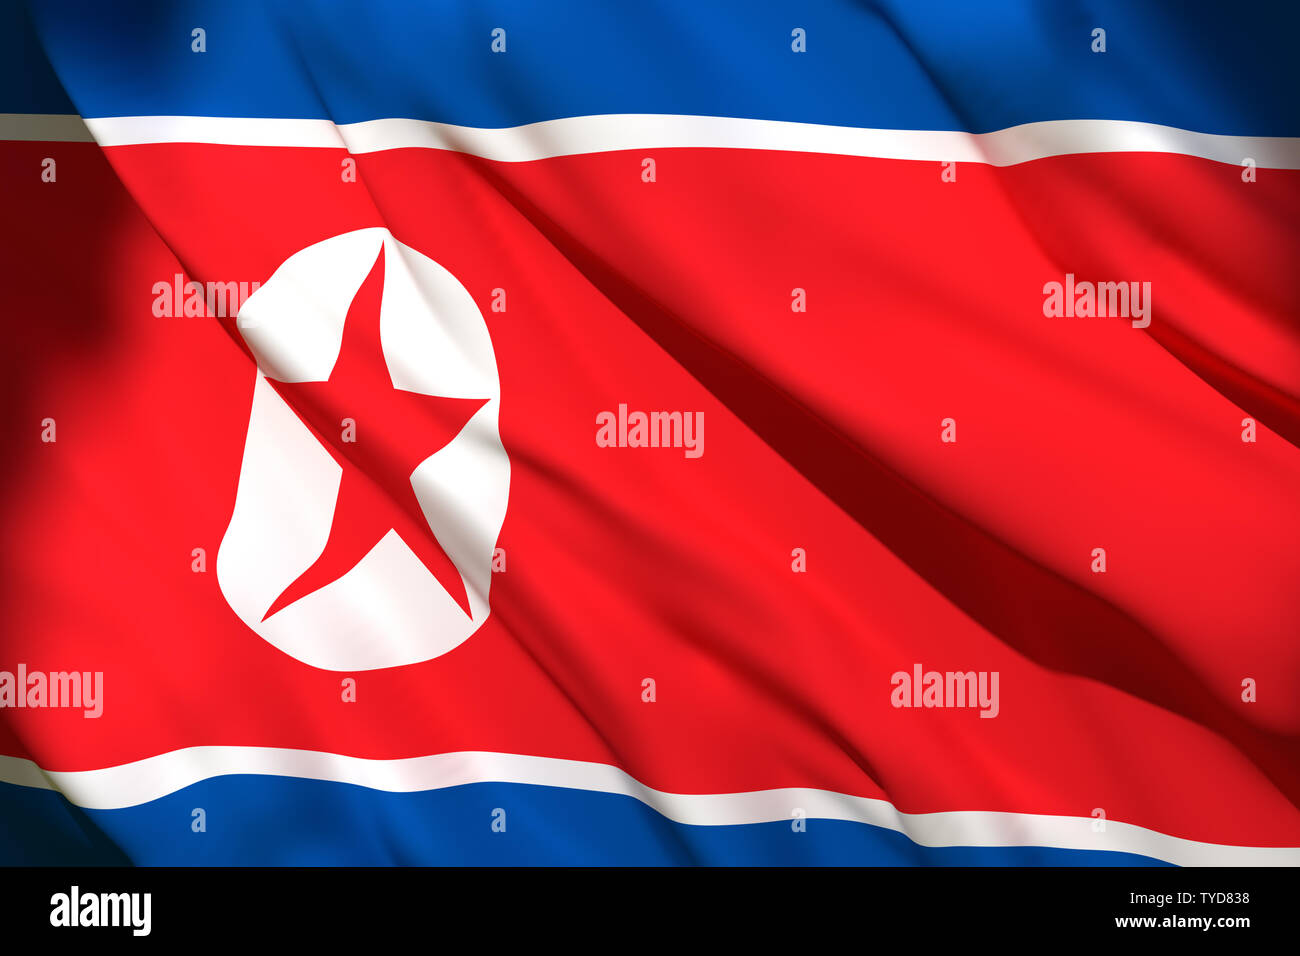 3d rendering of a North Korea national flag waving Stock Photo